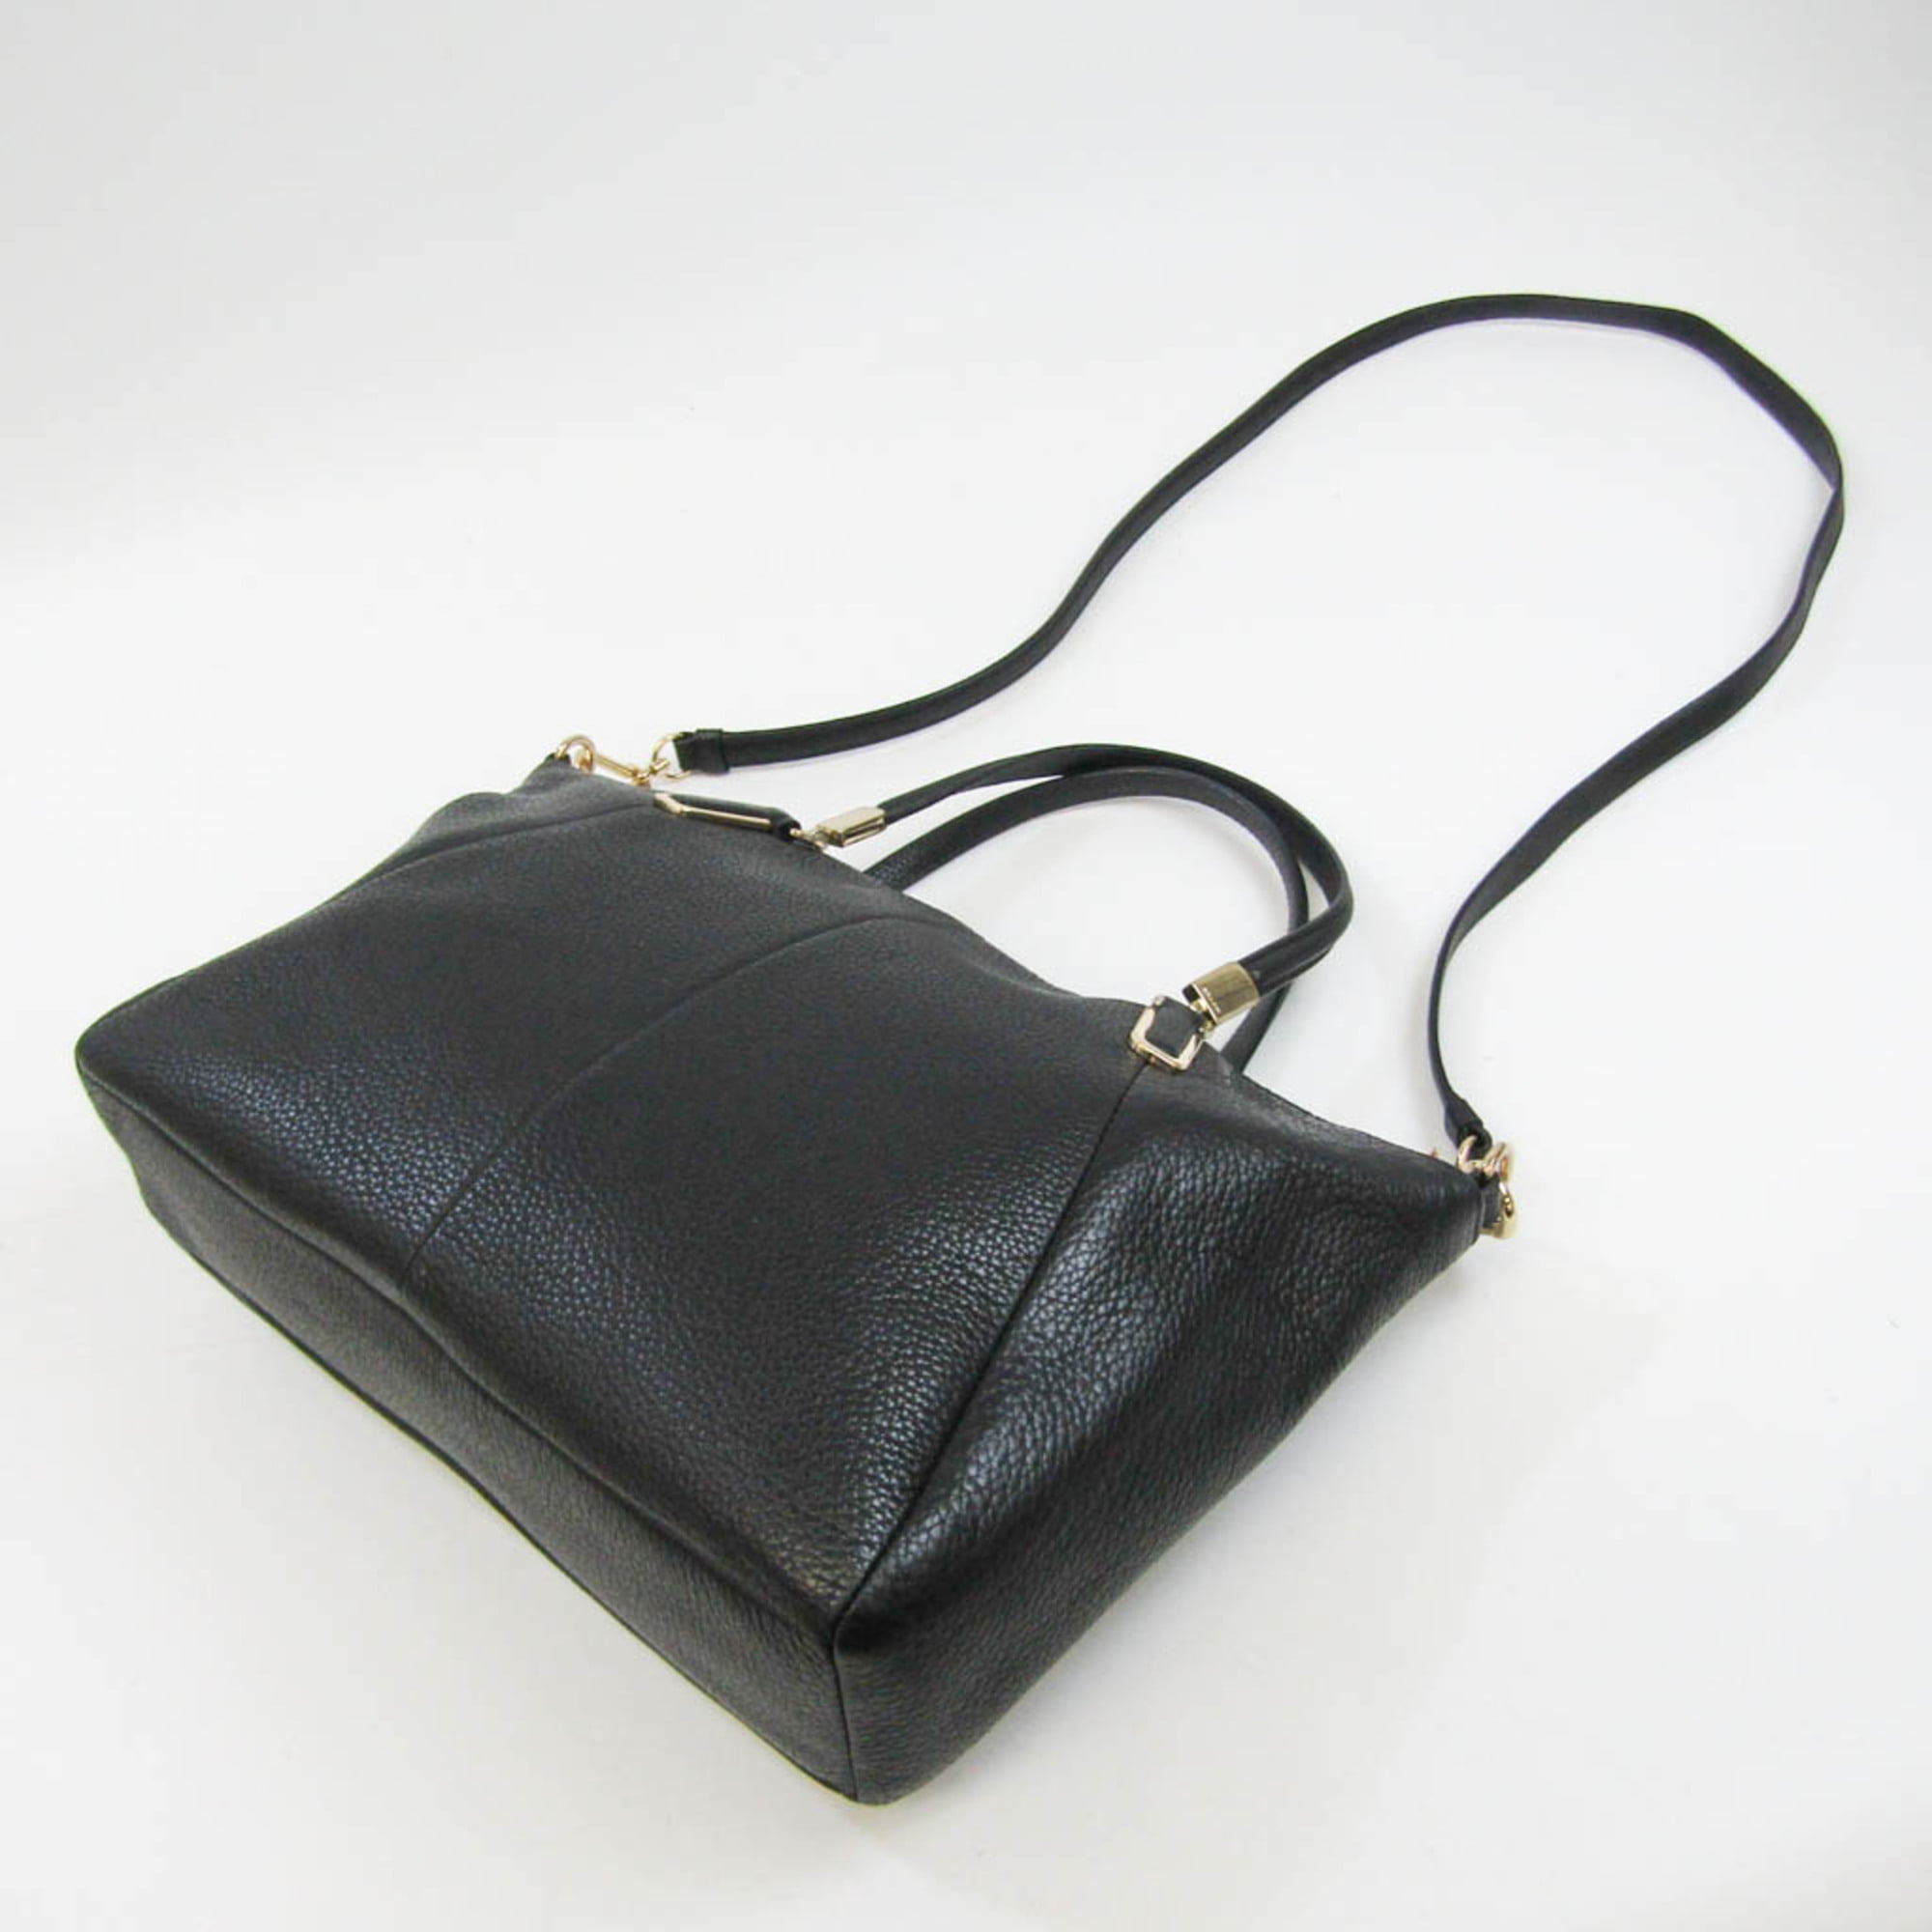 Coach - Authenticated Madison Handbag - Leather Black Plain for Women, Very Good Condition